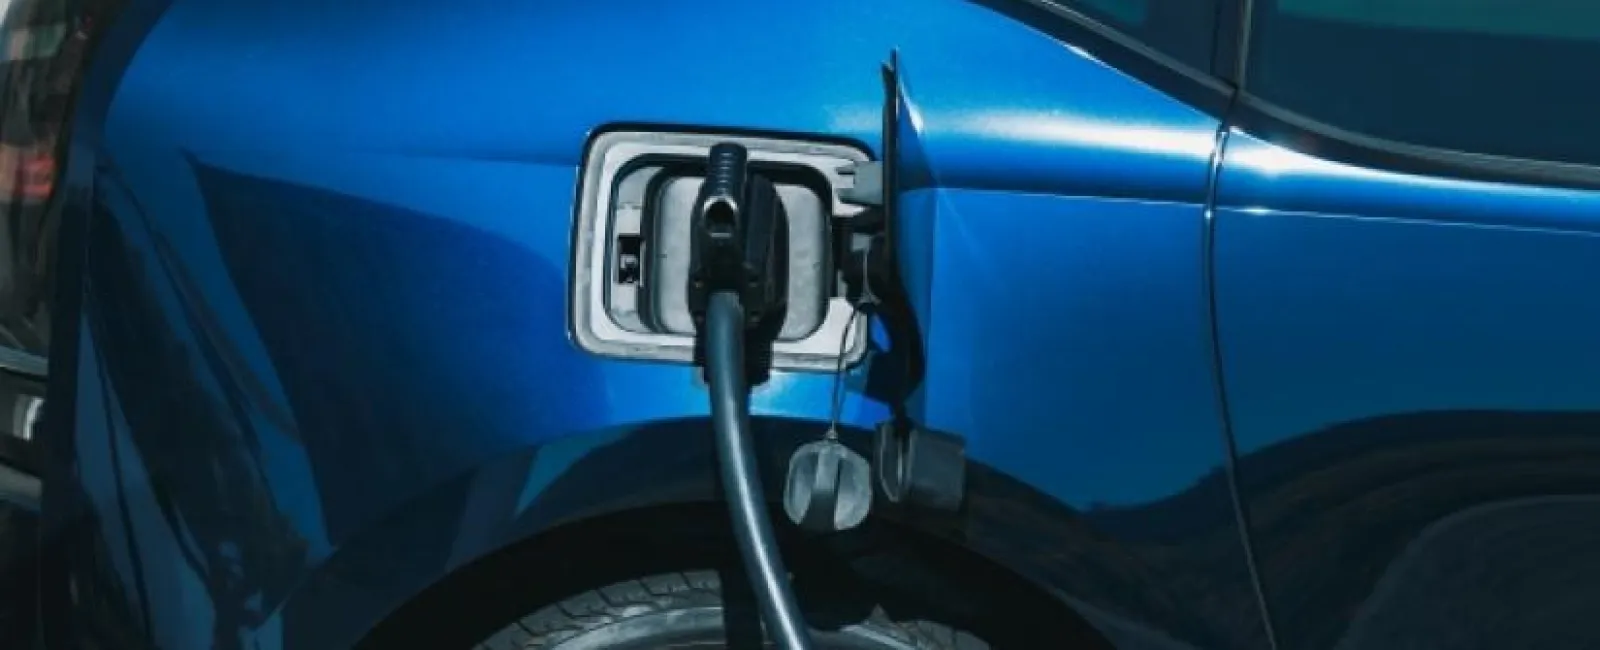 How Do Electric Vehicles Impact Electric Bills?